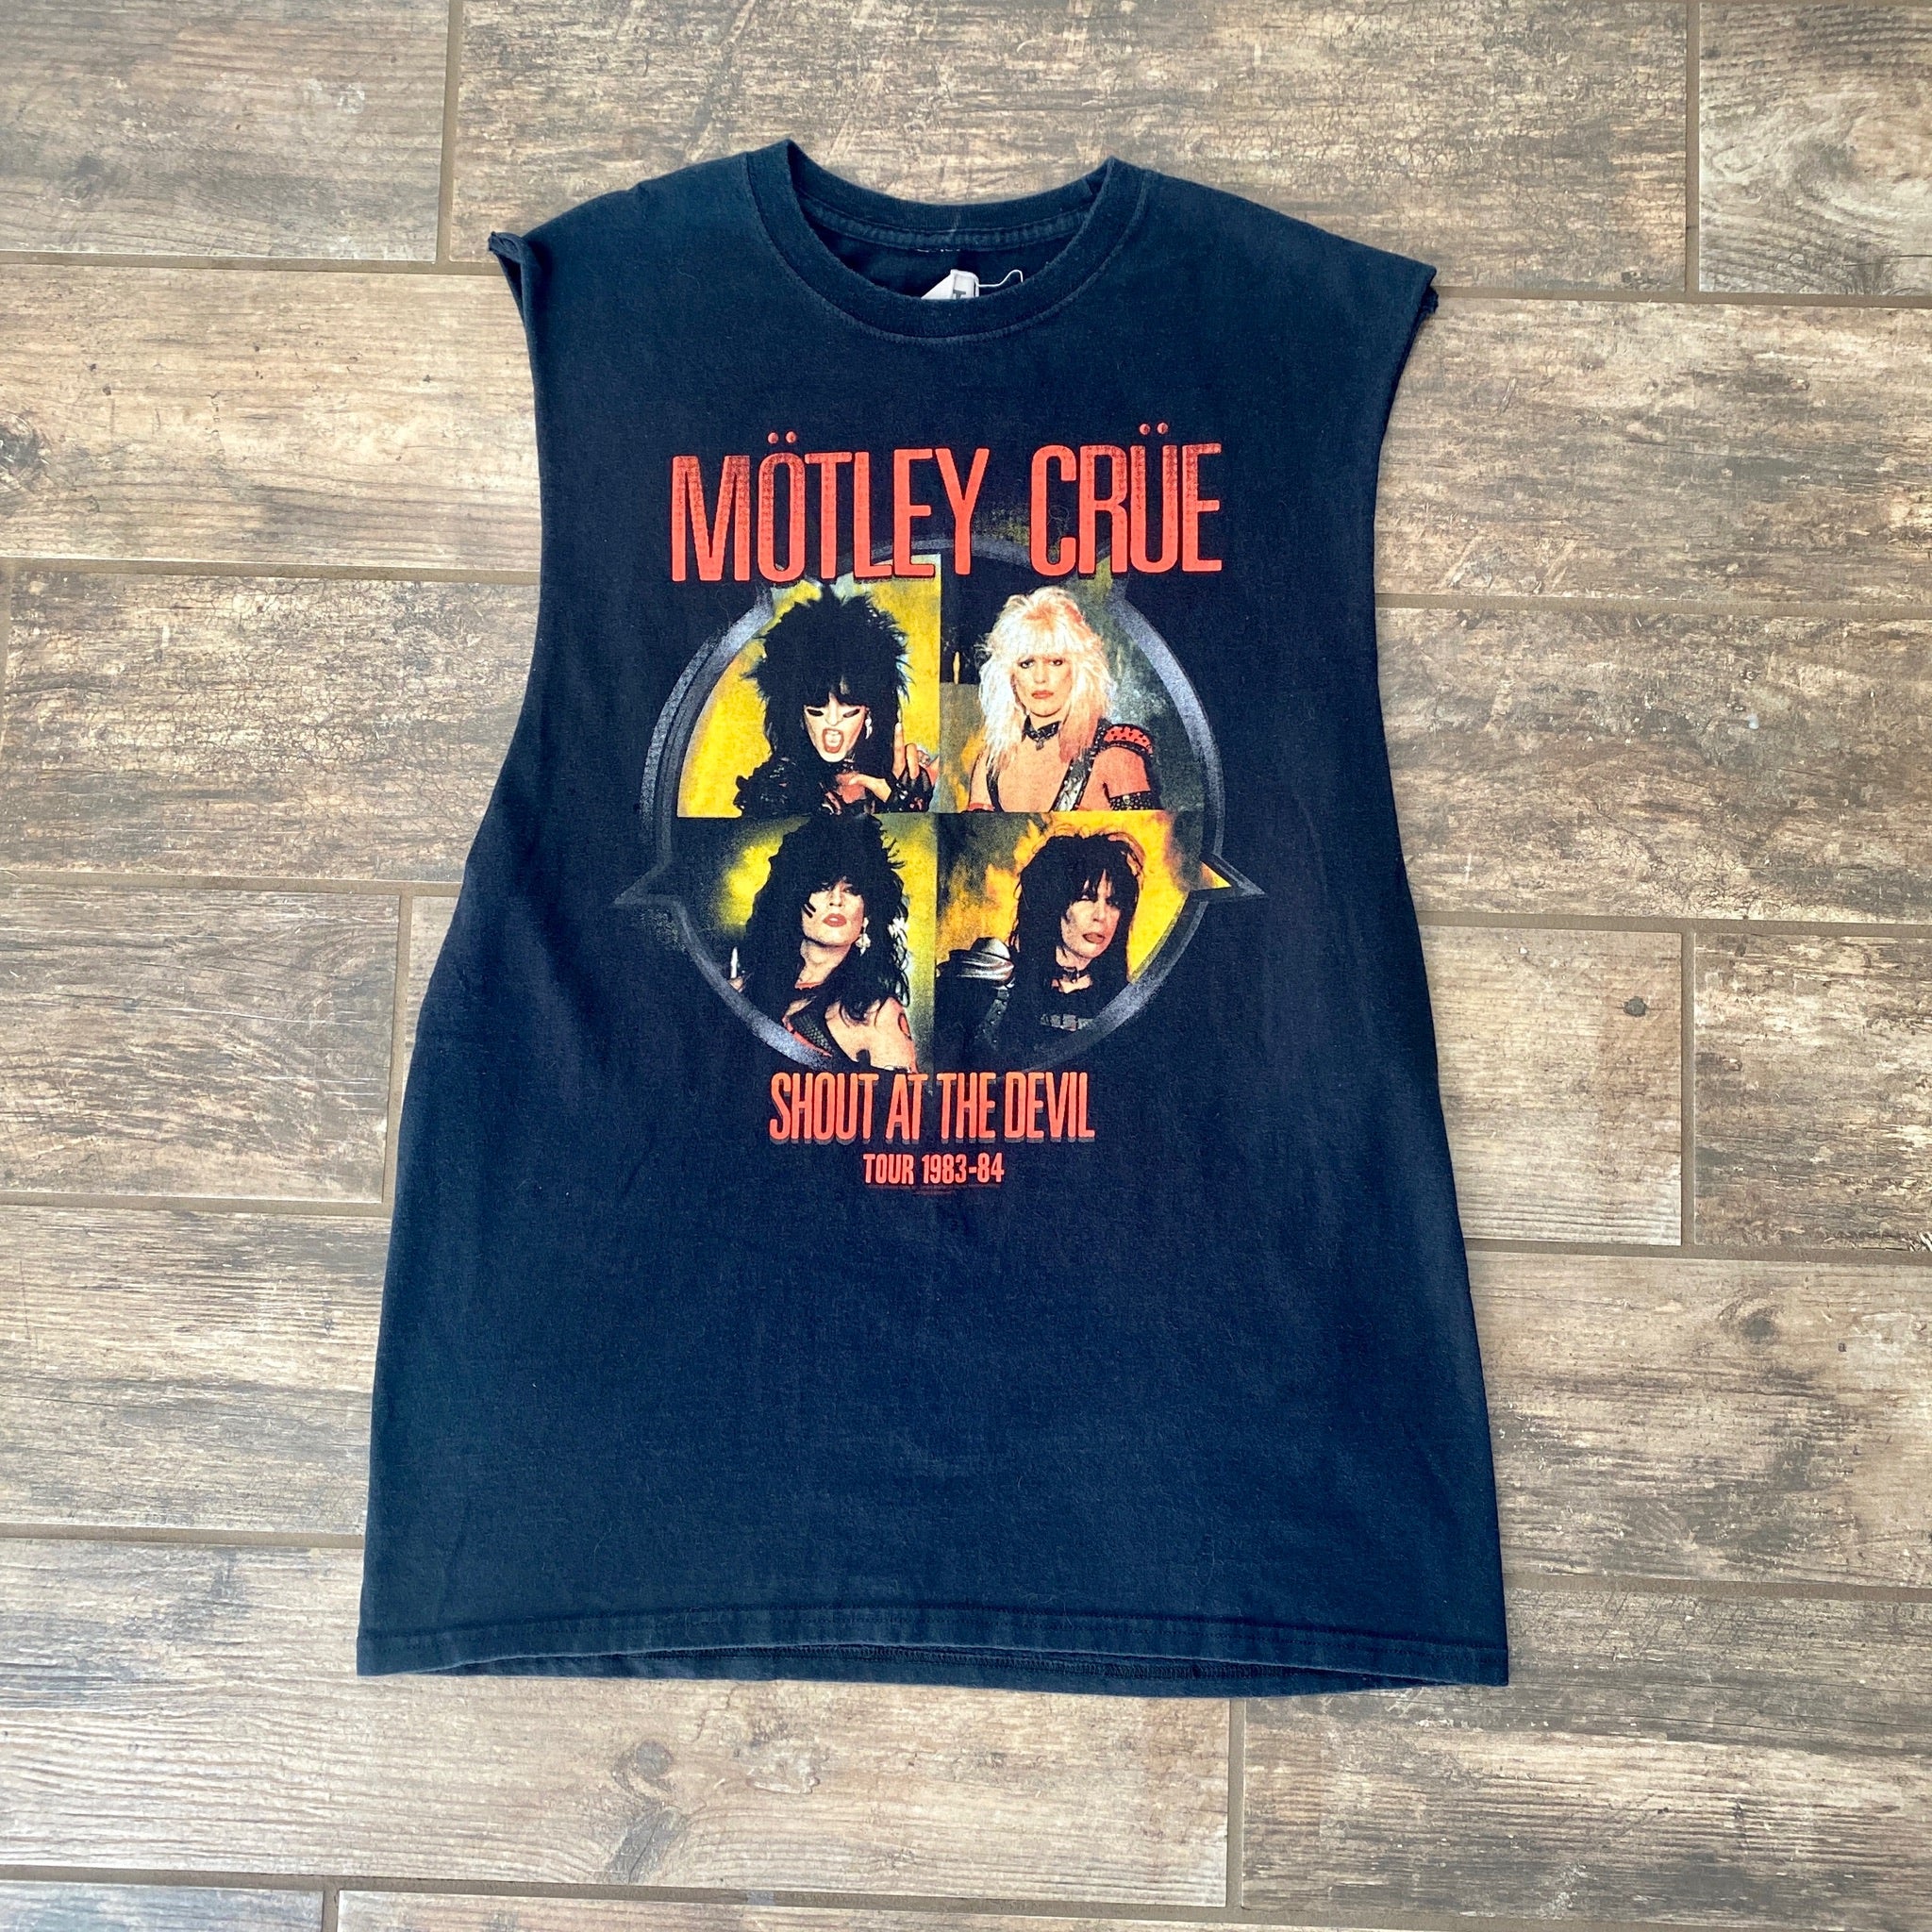 Motley Crue 1983 Shout At The Devil I'm The Blood Stain On The Stage  Personalized Baseball Jersey - Growkoc